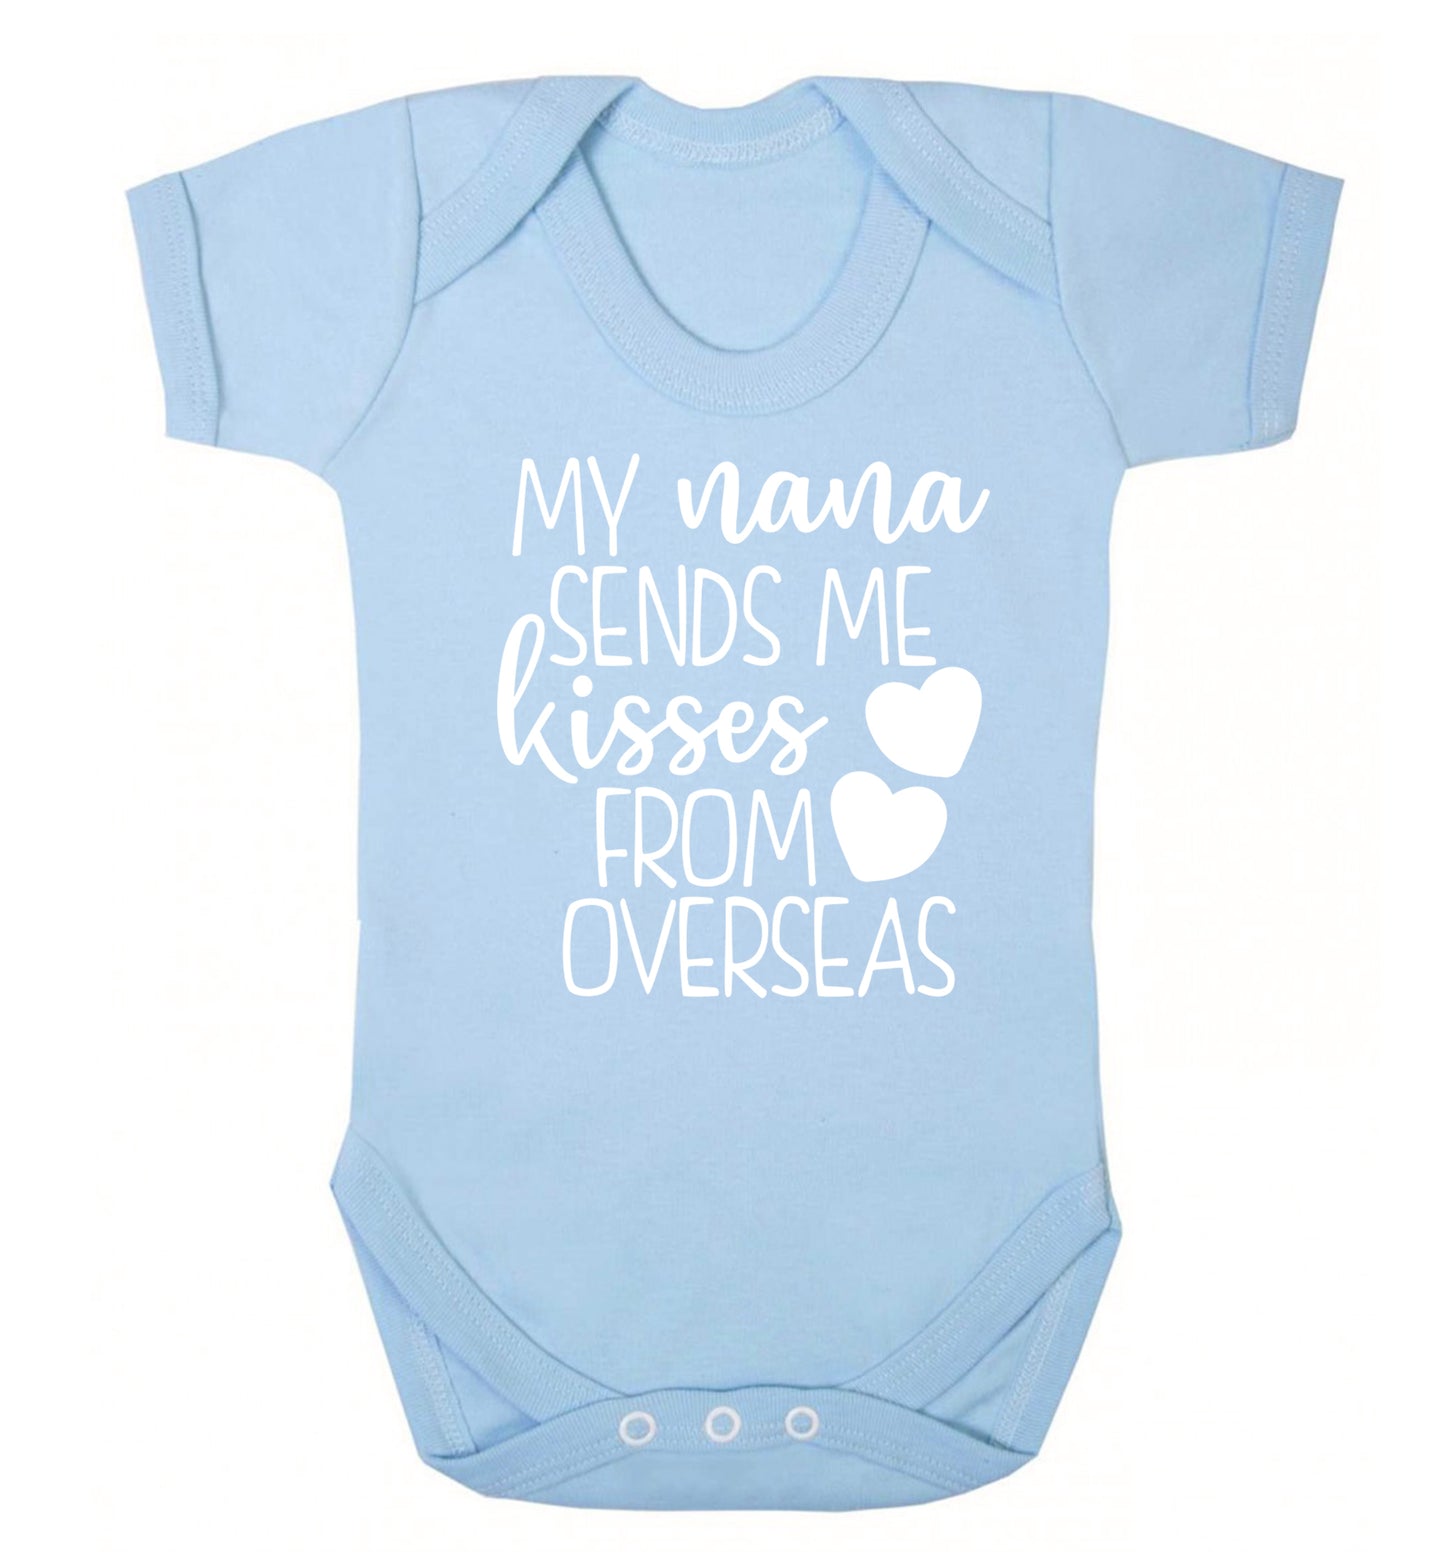 My nana sends me kisses from overseas Baby Vest pale blue 18-24 months